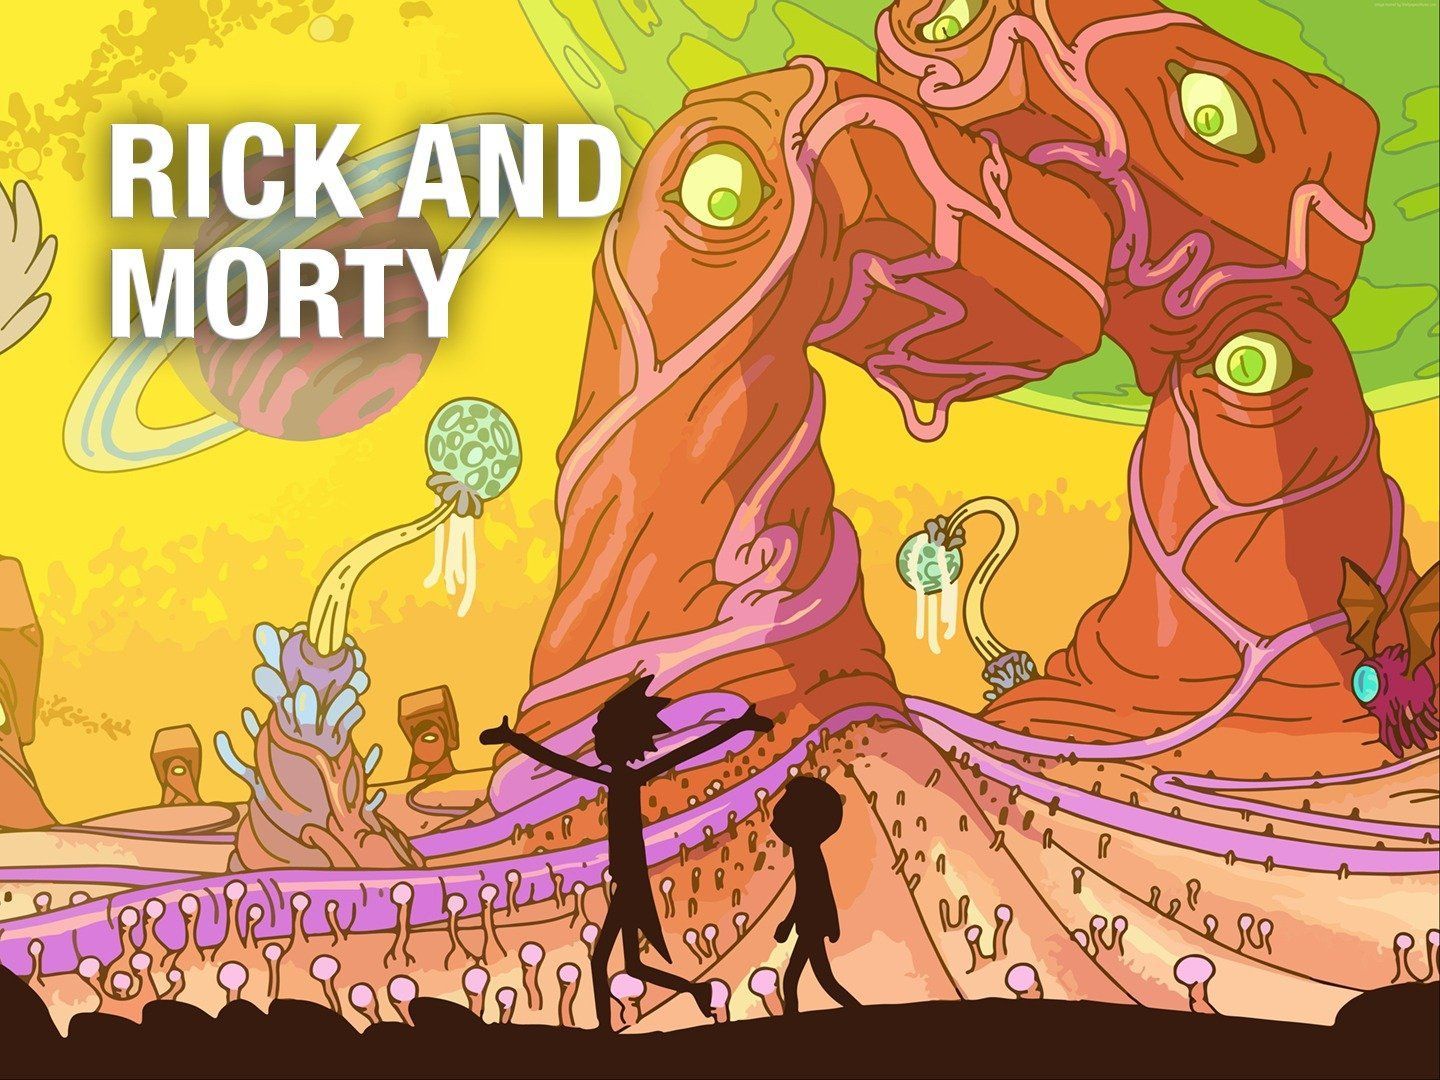 Rick and morty wallpaper 1920x1080 for android 1920x1080 - Rick and Morty